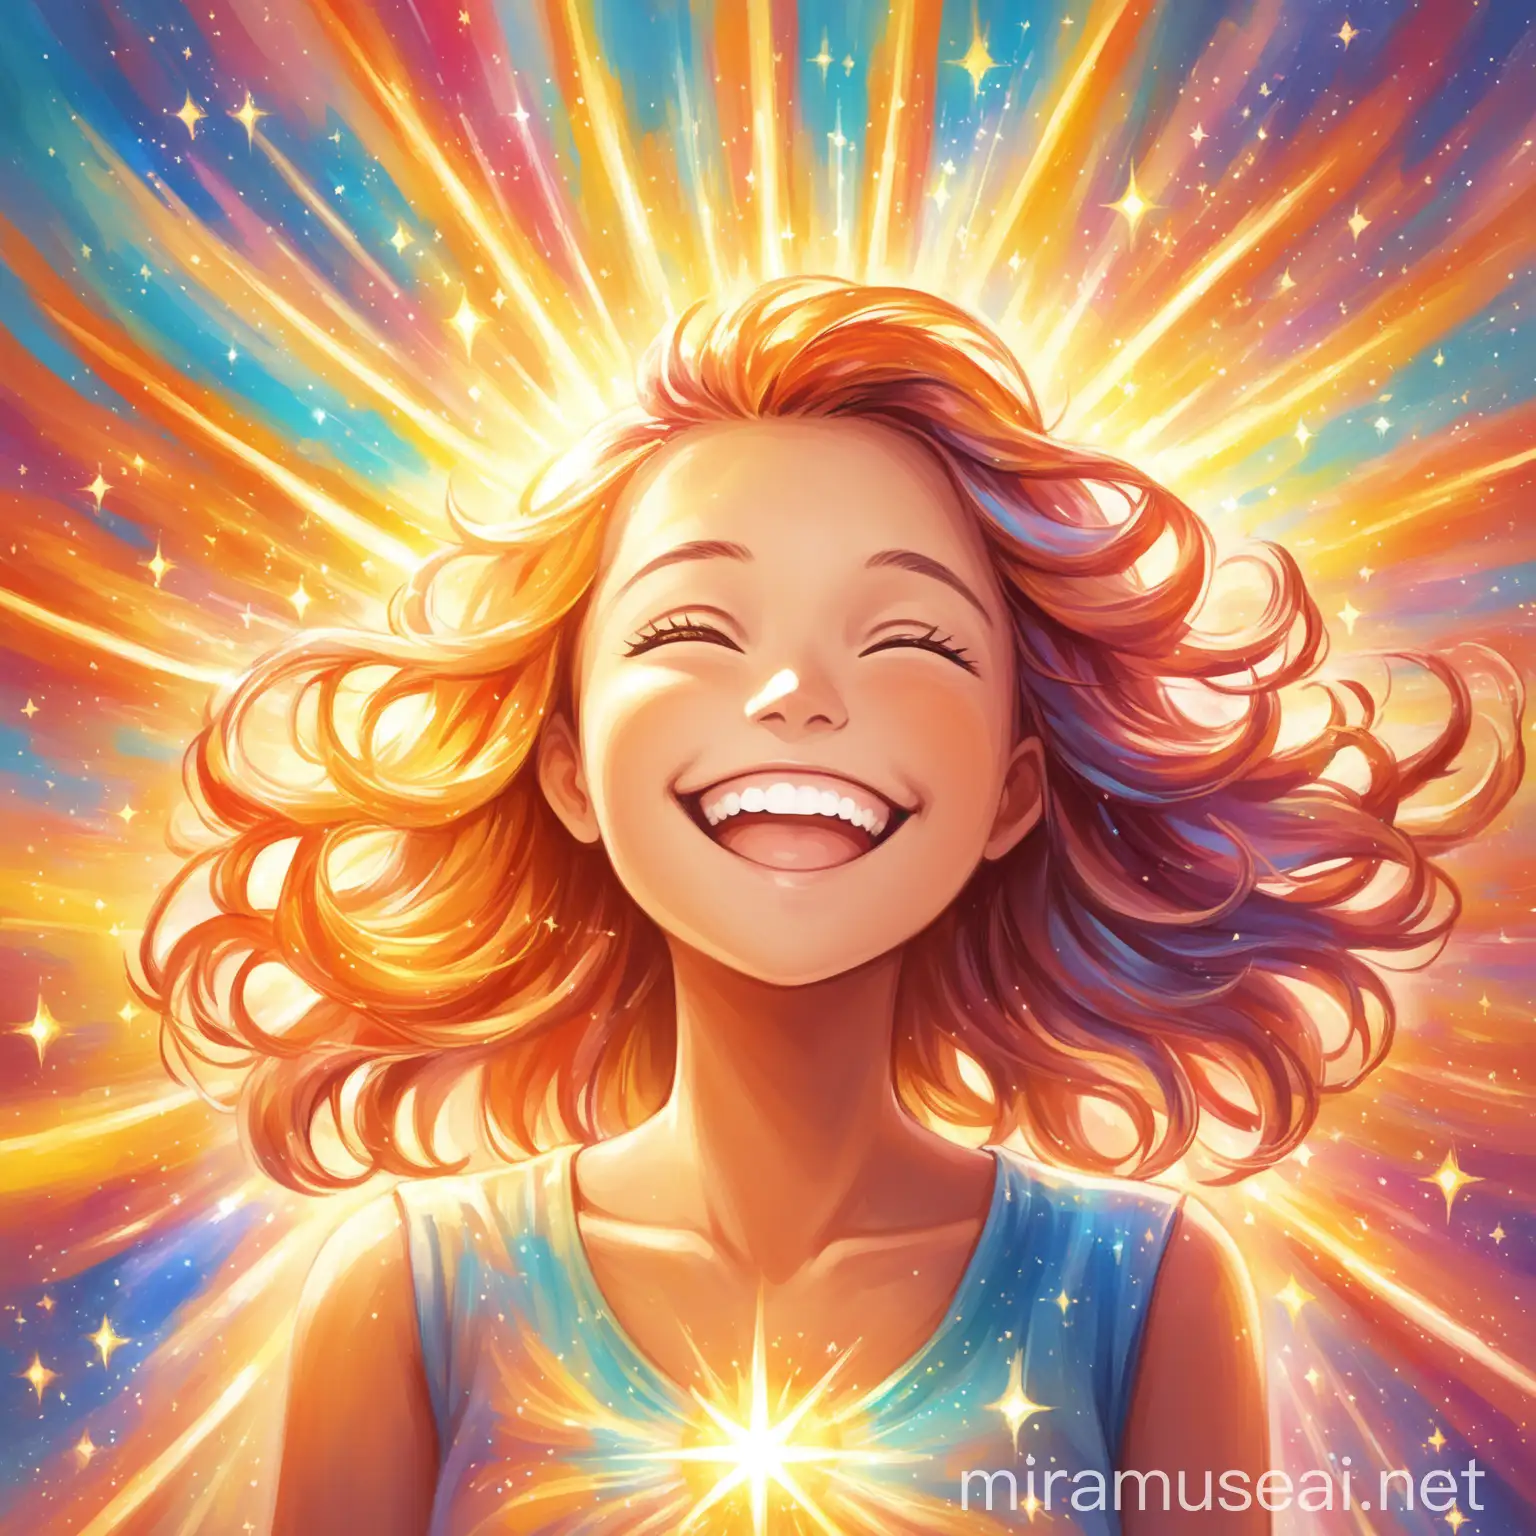 Radiant Energy Optimistic Girl with Dazzling Smile and Overflowing Passion